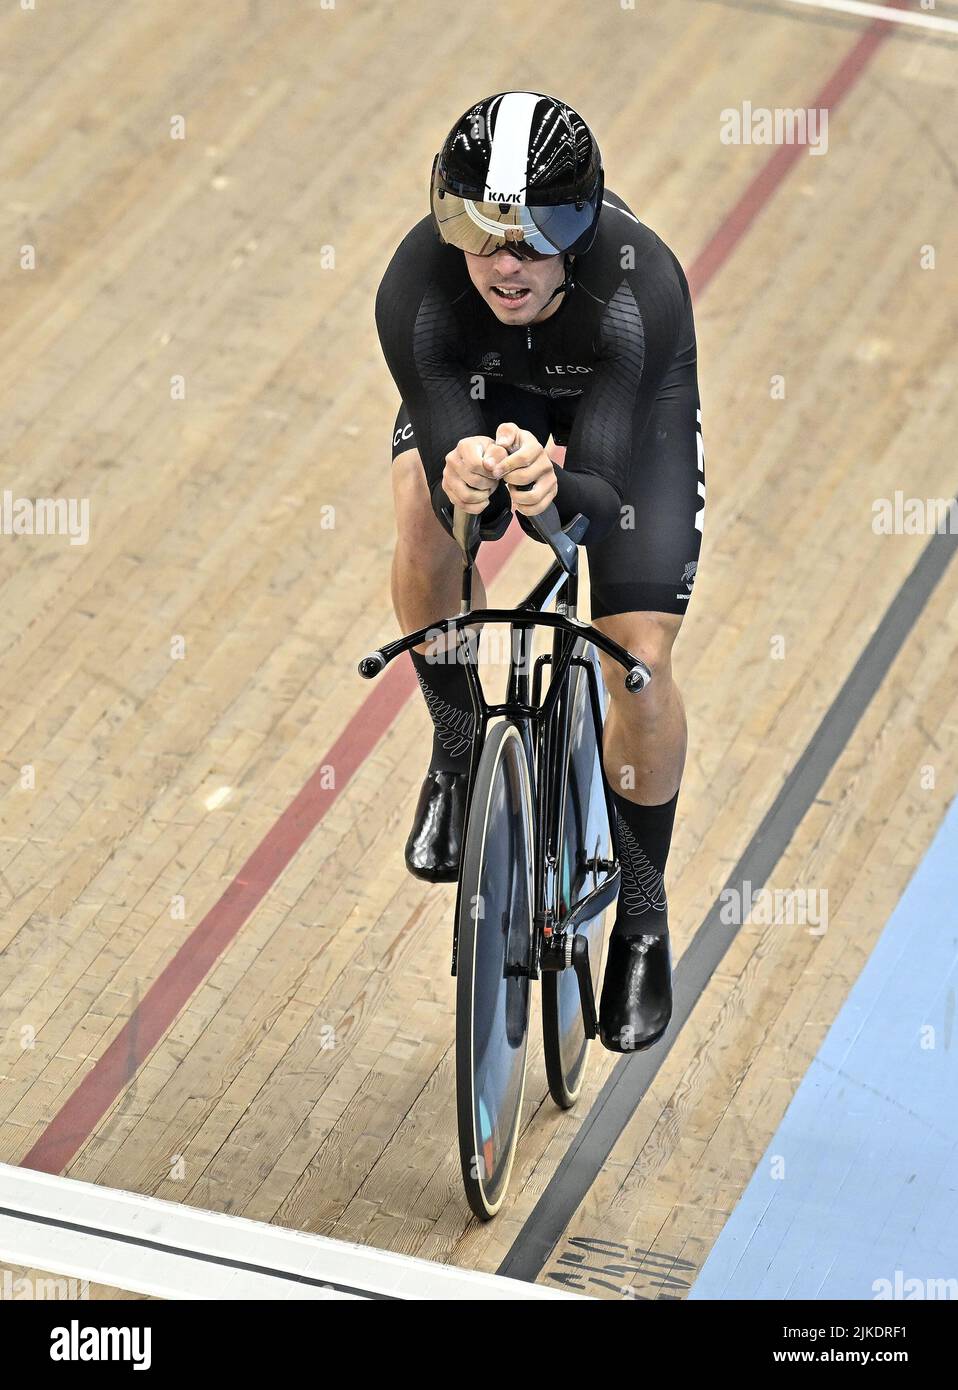 Stratford, United Kingdom. 01st Aug, 2022. Commonwealth Games Track Cycling. Olympic Velodrome. Stratford. Nicholas Kergozou De La Boessiere (NZL) during the Mens 1000m Time Trial. Credit: Sport In Pictures/Alamy Live News Stock Photo